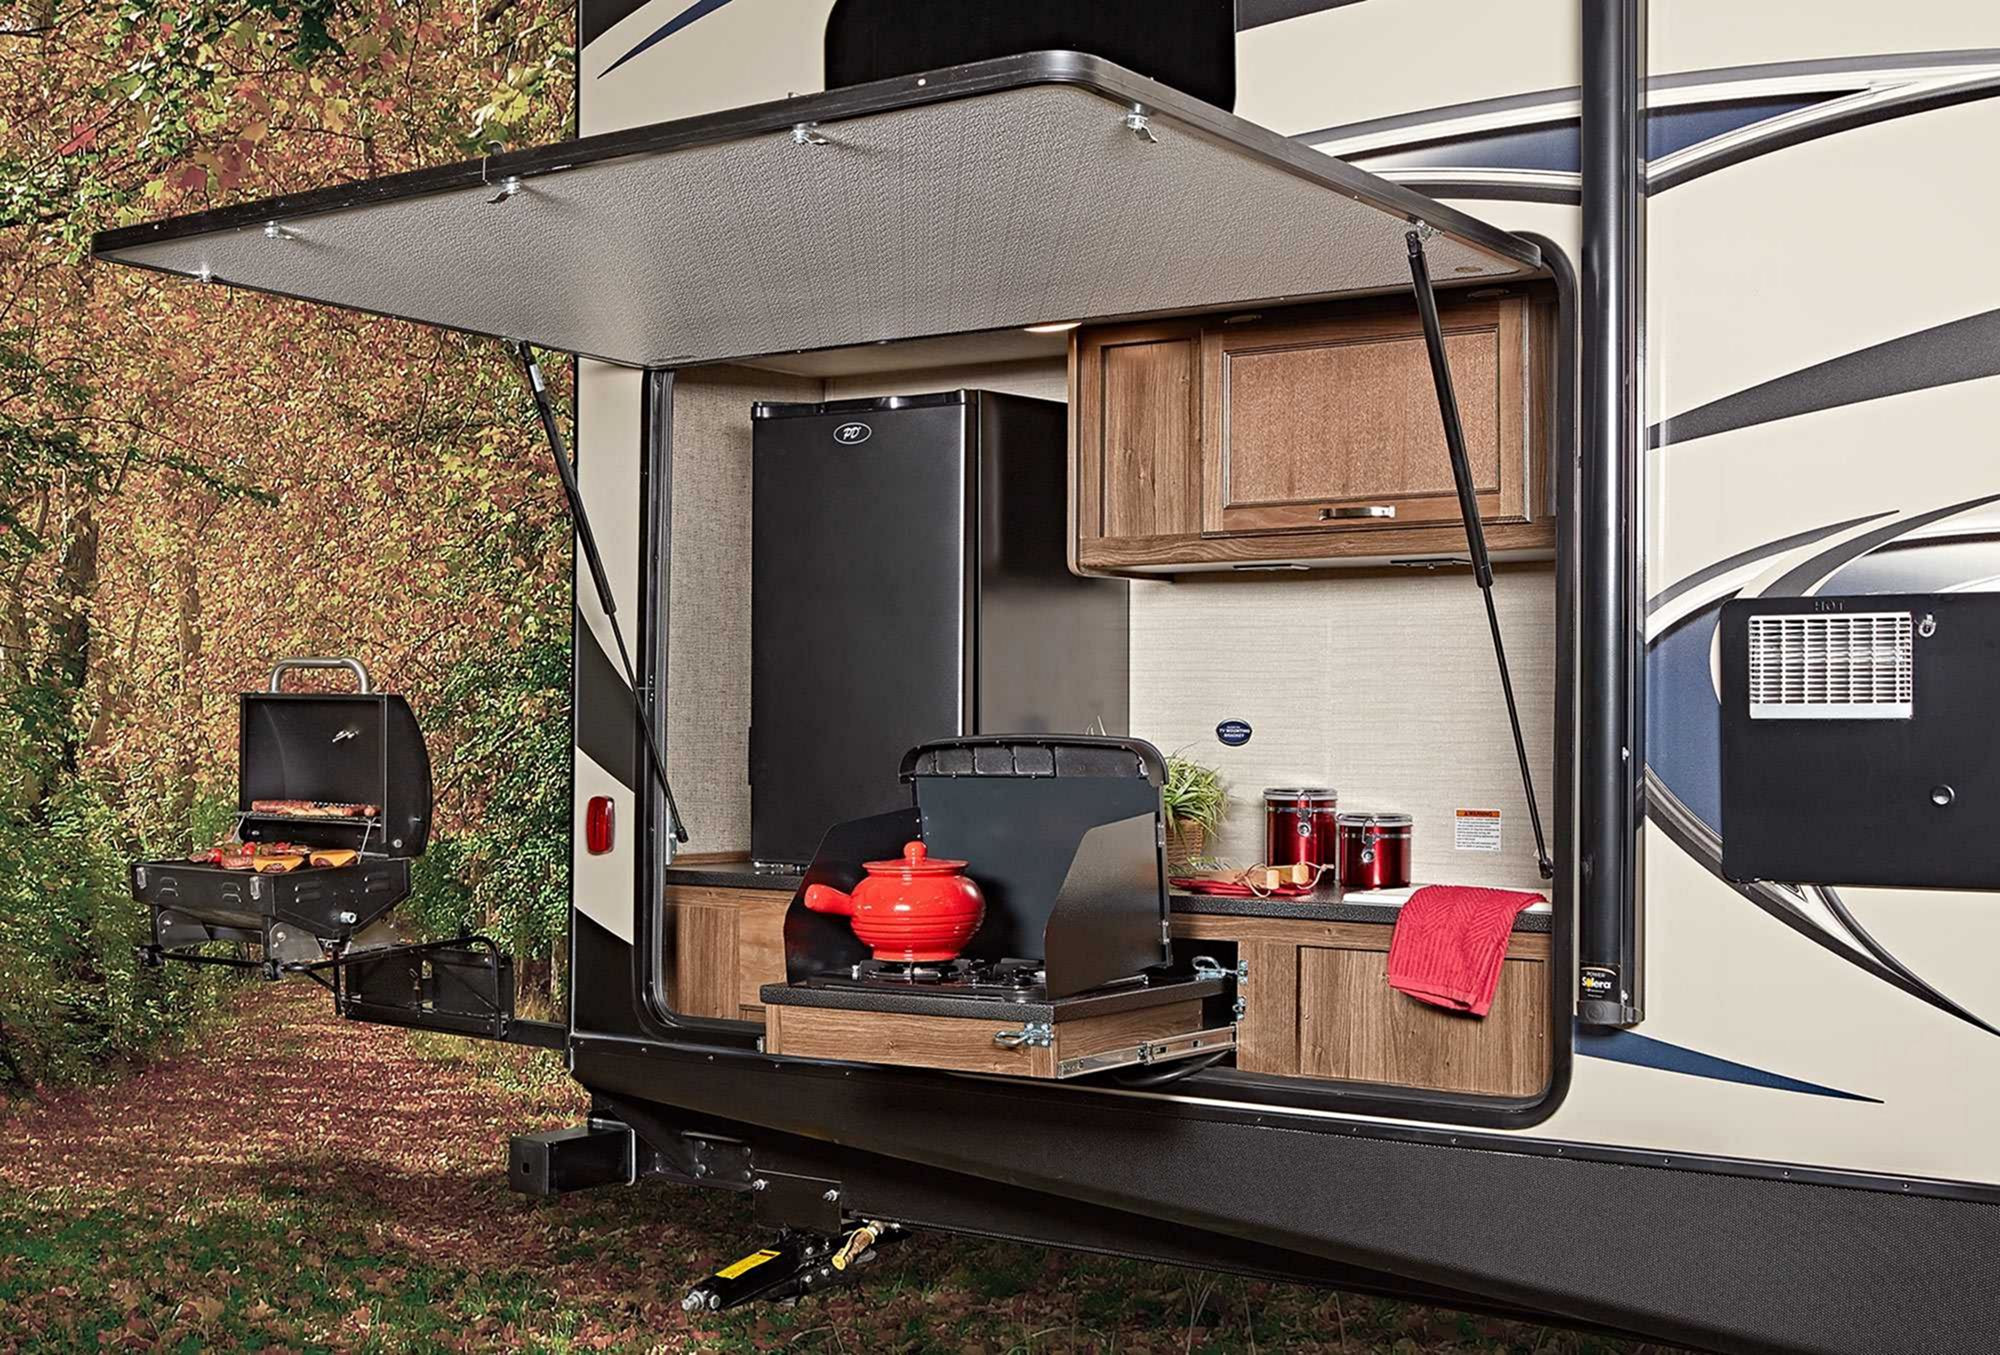 Rv Outdoor Kitchen Ideas
 Travel Trailer With Outdoor Kitchen And Bunkhouse